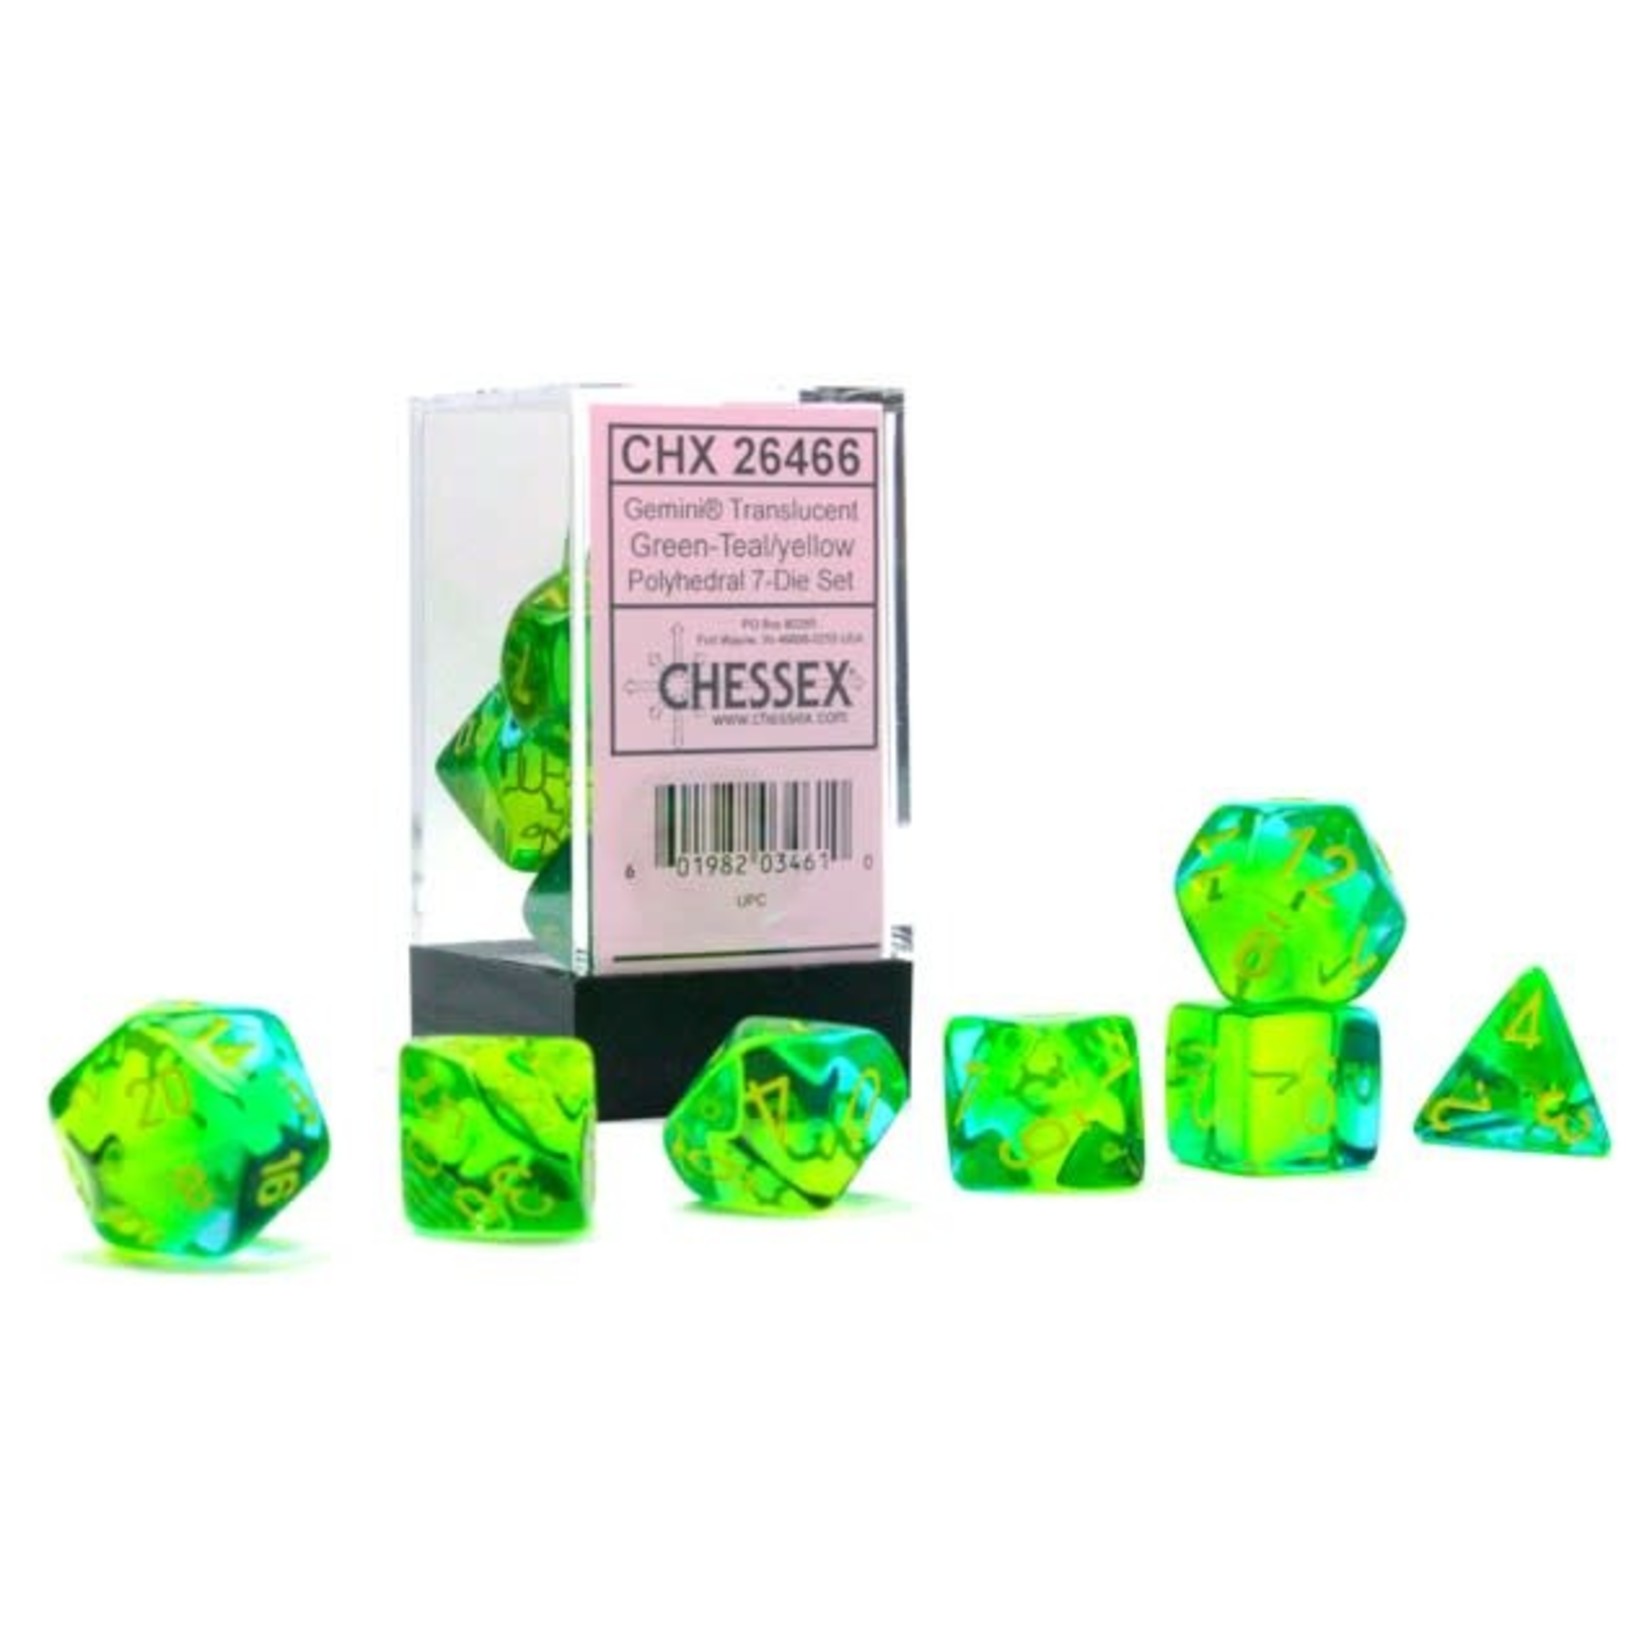 Chessex 26466 Gemini Translucent Green/Teal with Yellow 7-Set